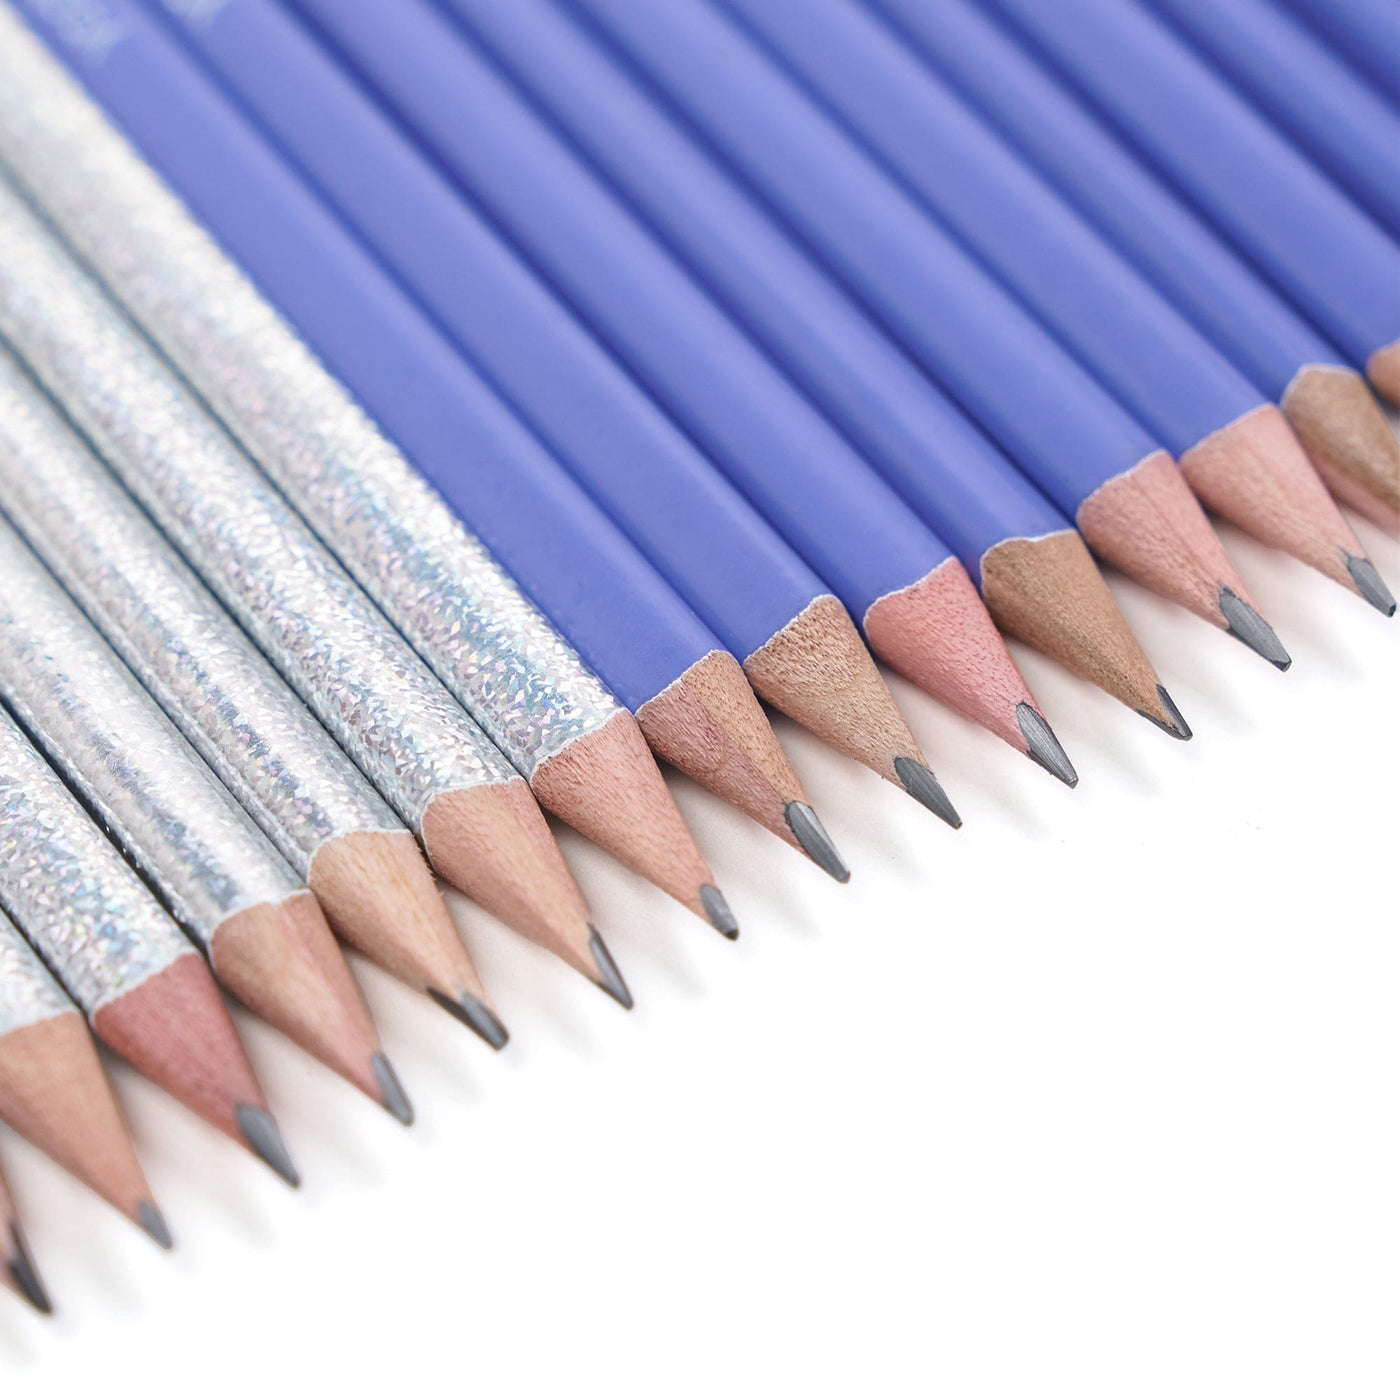 Close up of pre-sharpened pencil tips